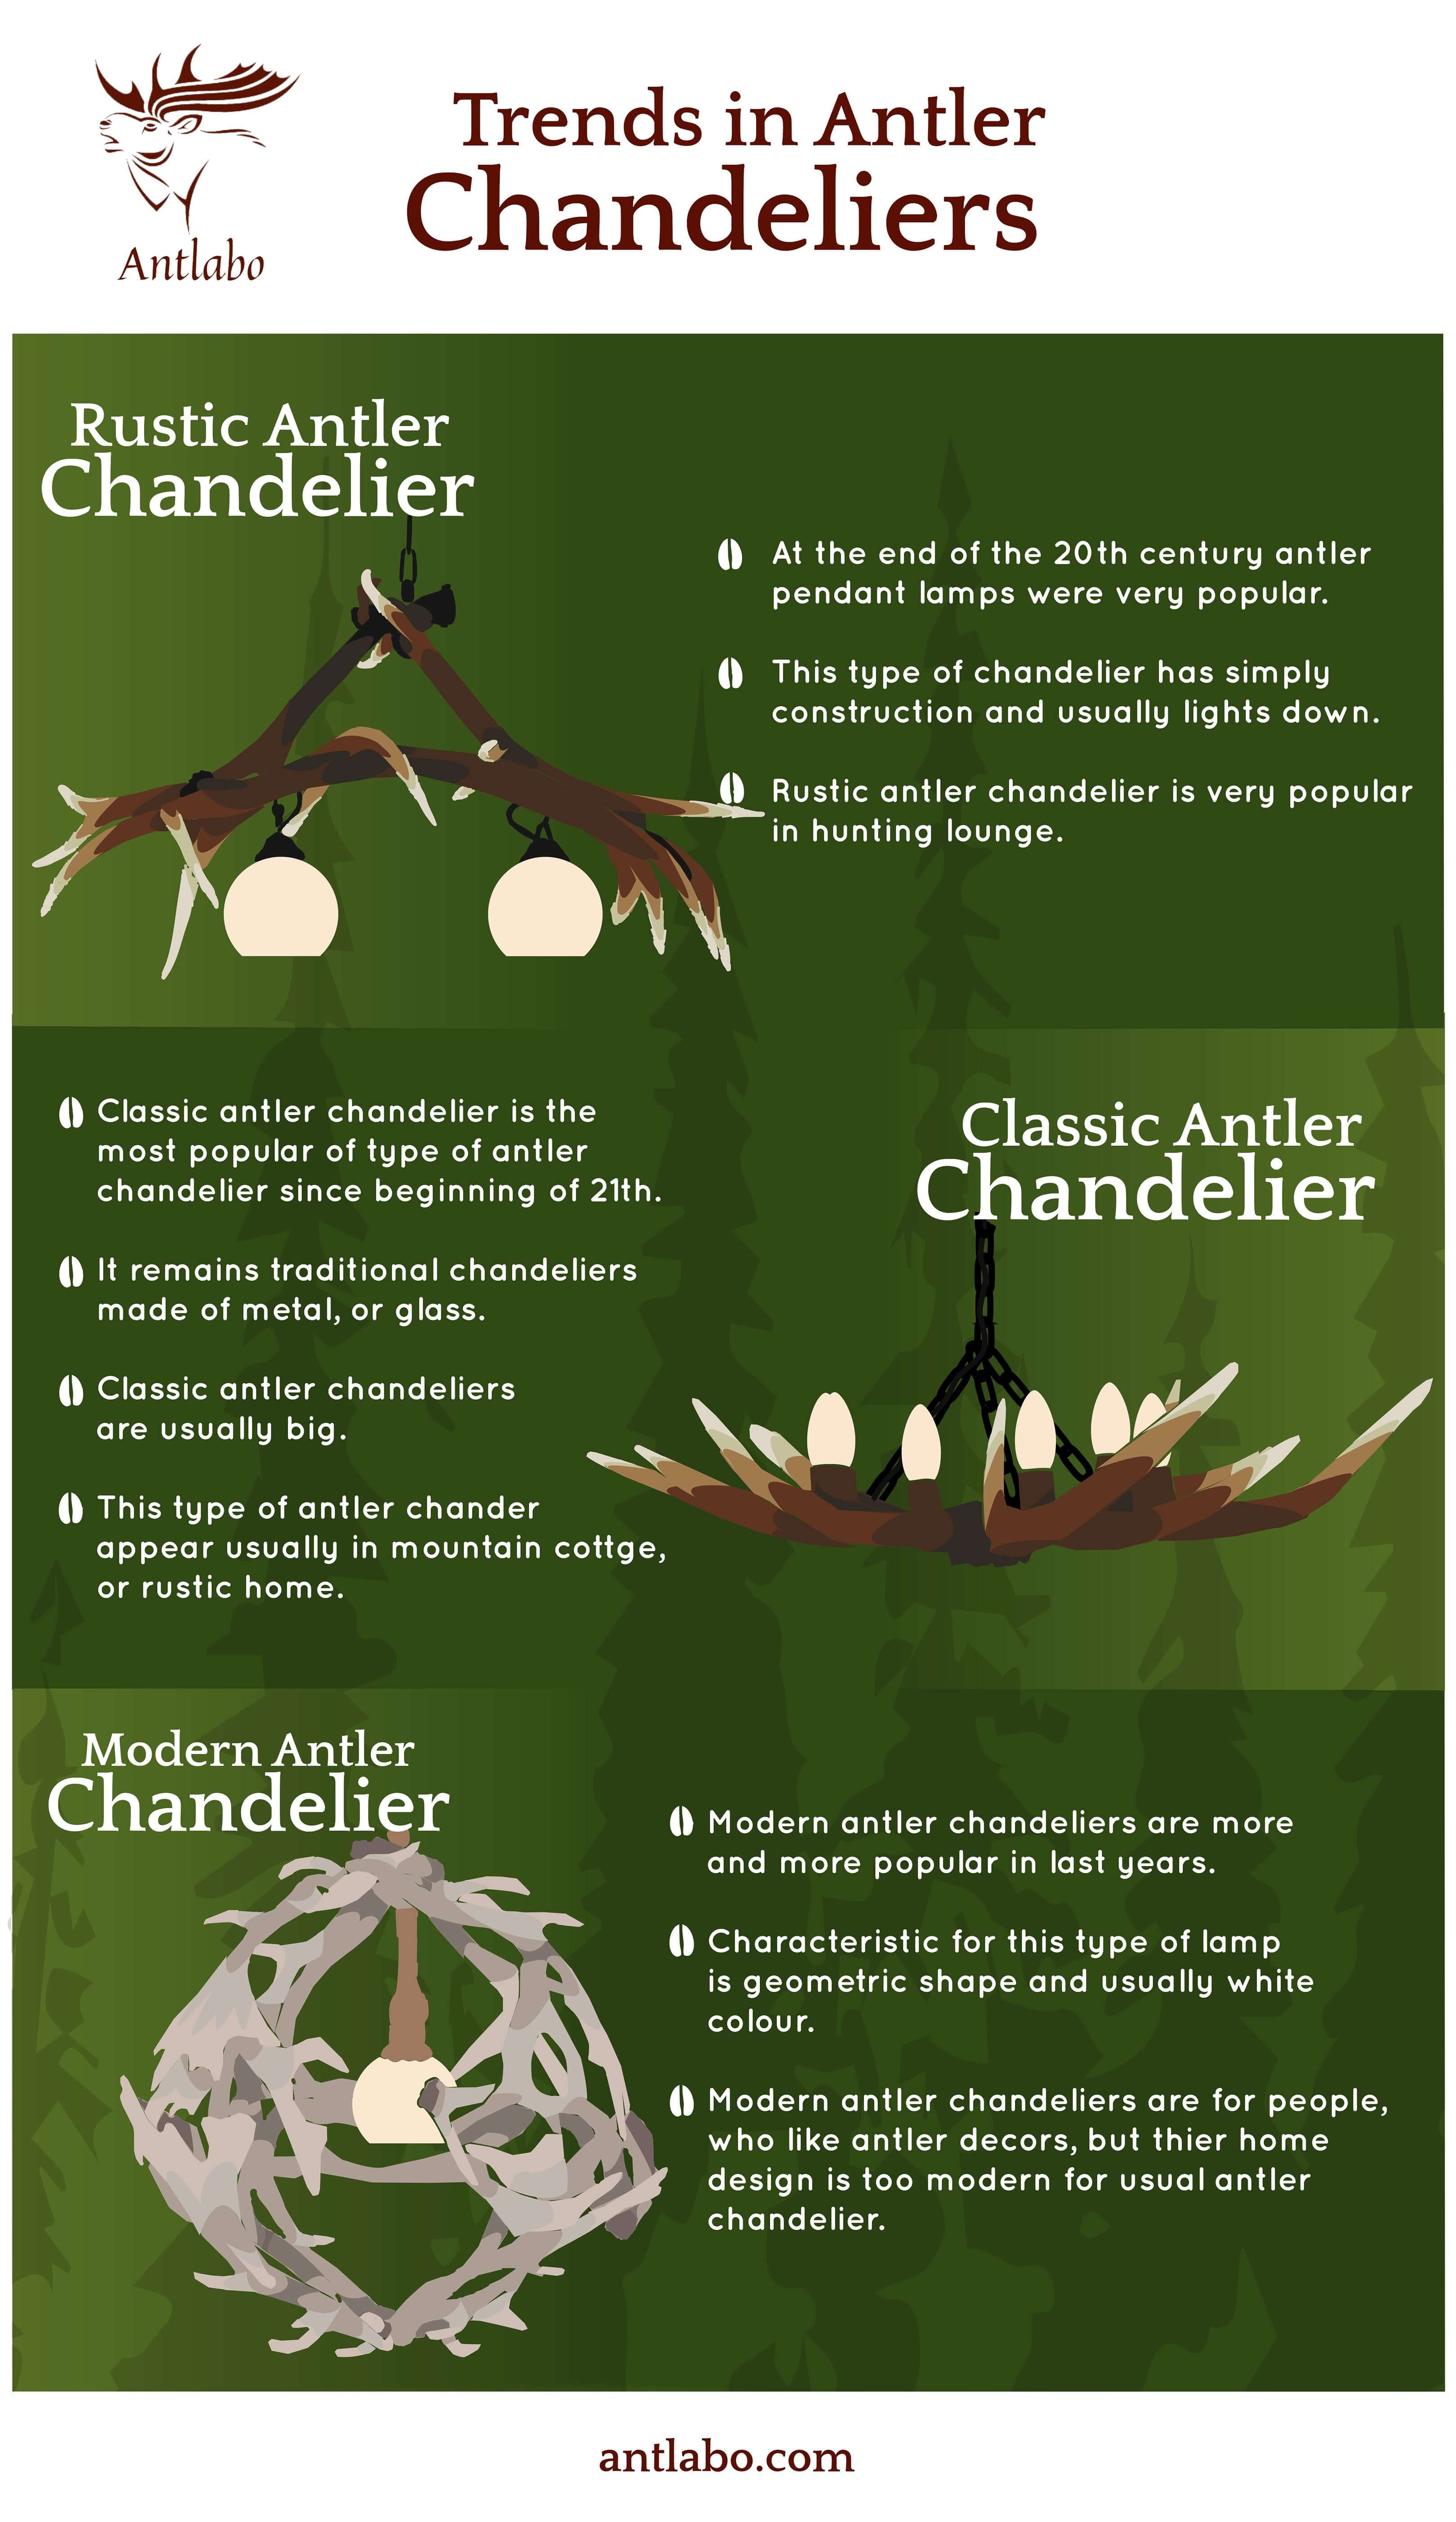 Infograpgic what type of antler chandeliers were popular in years and what type is trendy now.